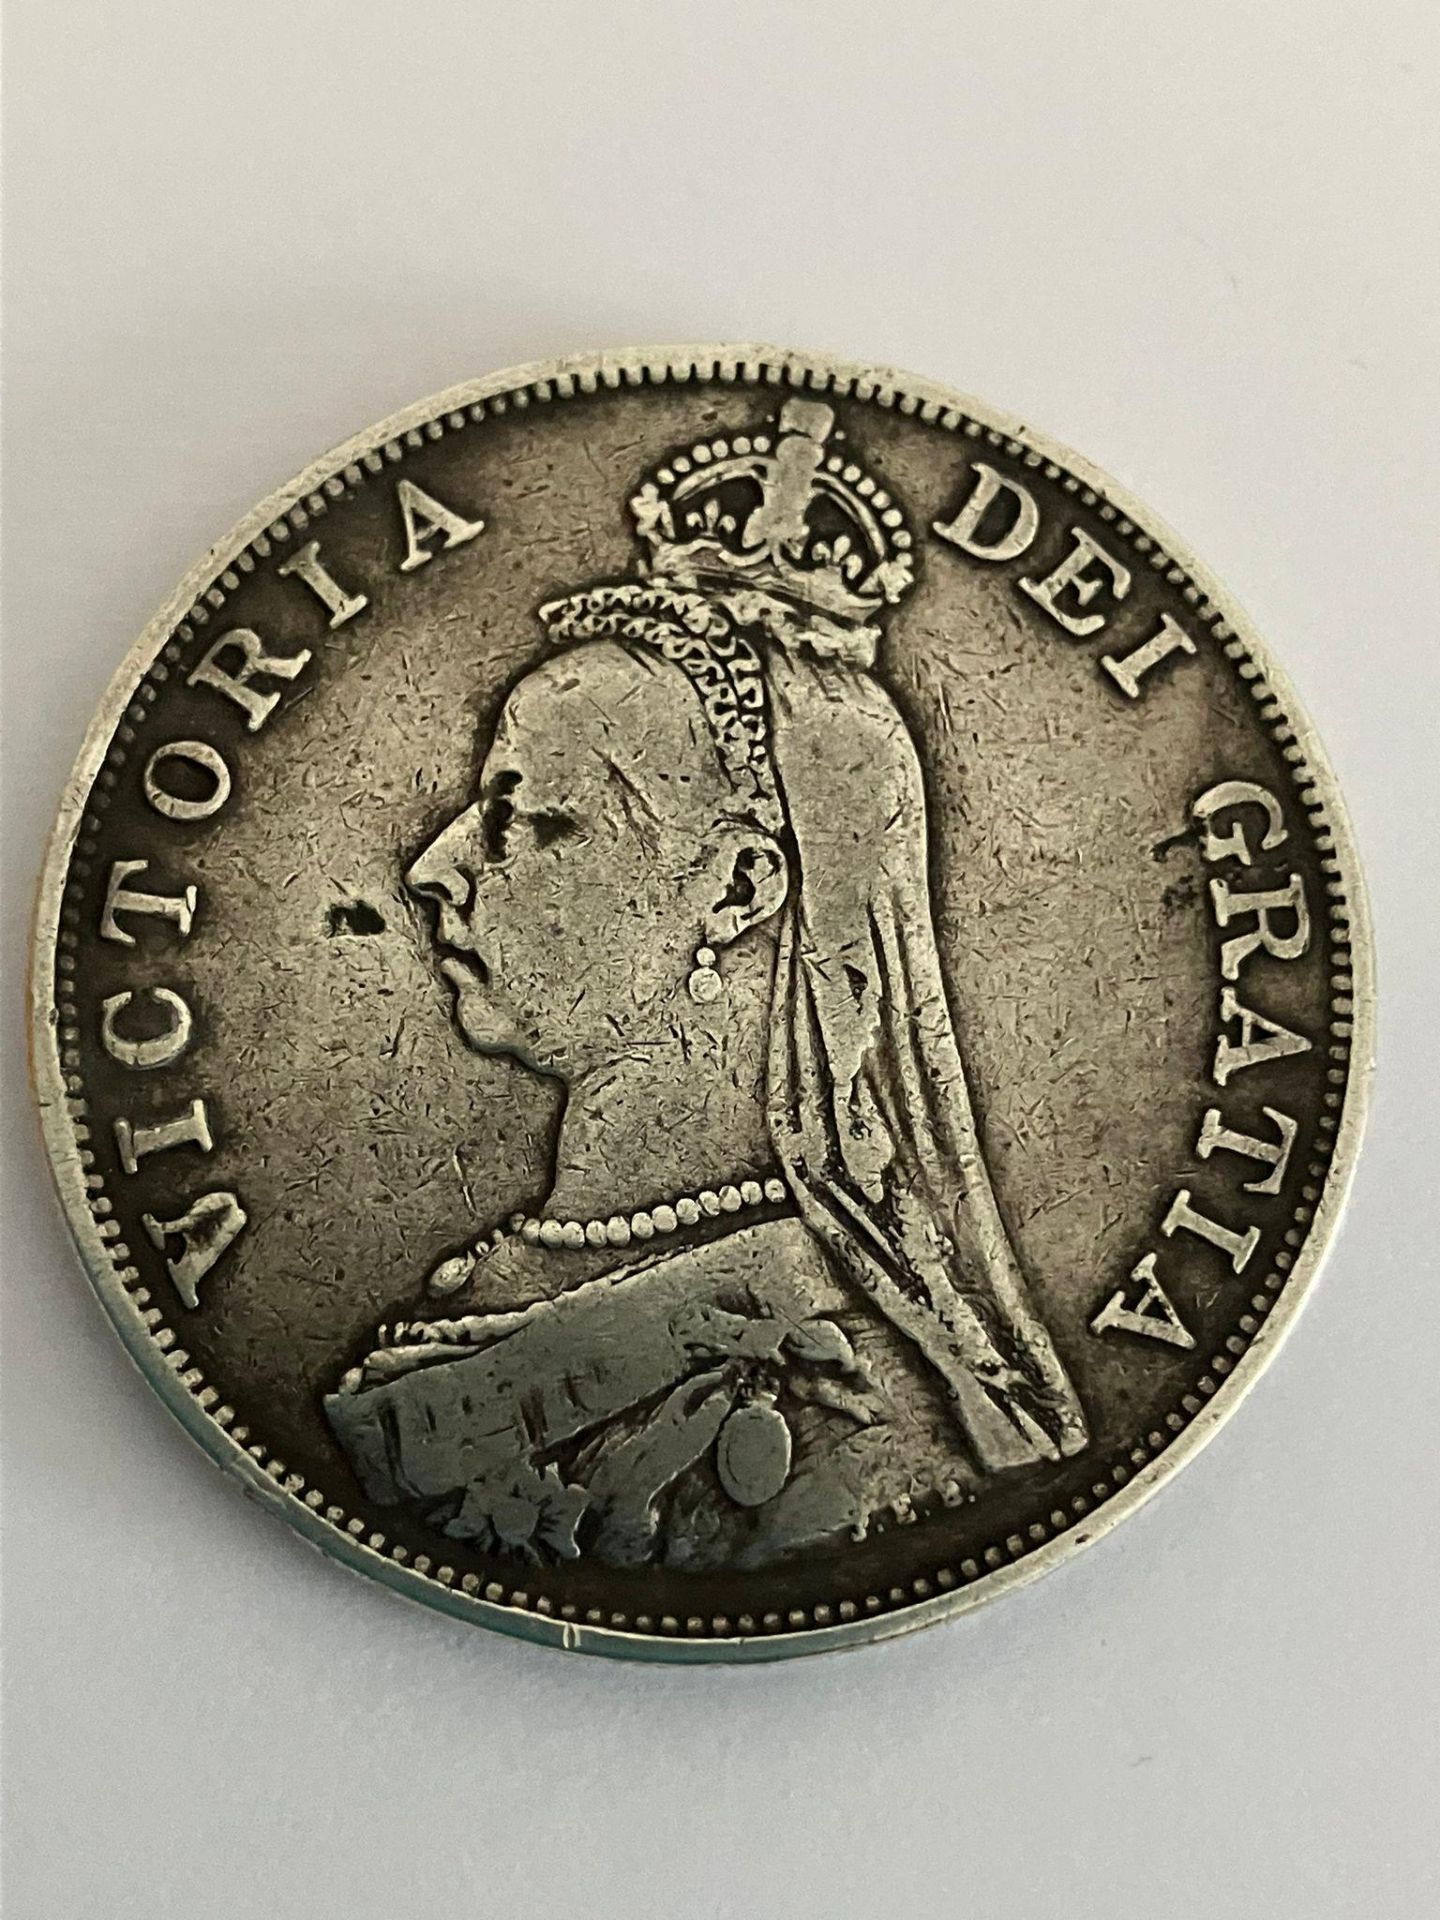 1889 SILVER DOUBLE FLORIN. Very fine condition. - Image 2 of 2